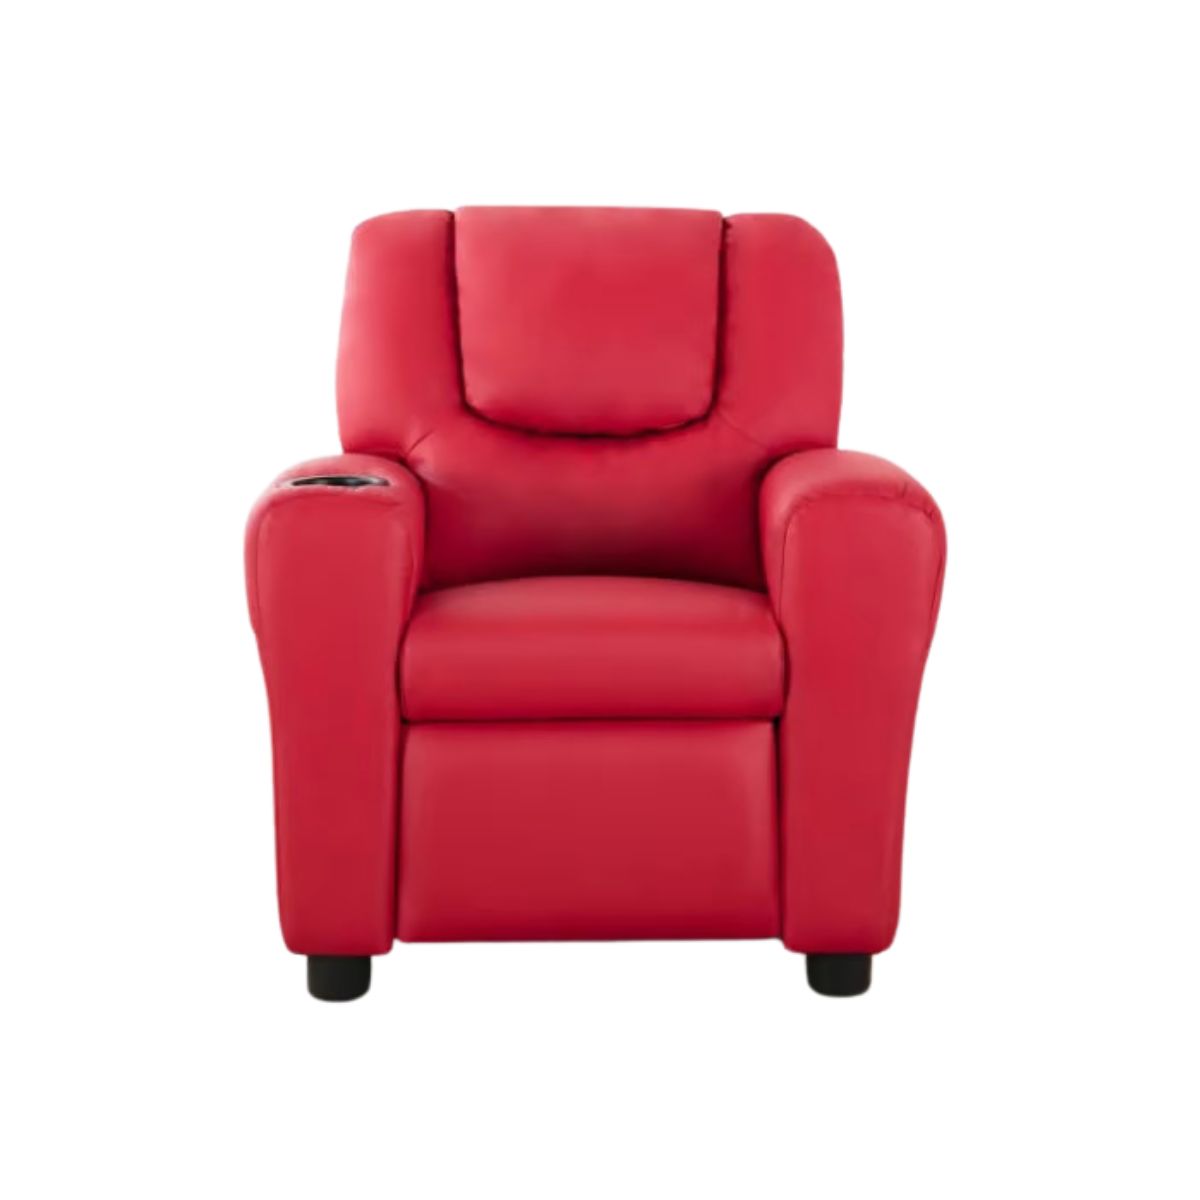 Kids Recliner Chair with Cup Holder Red - 1